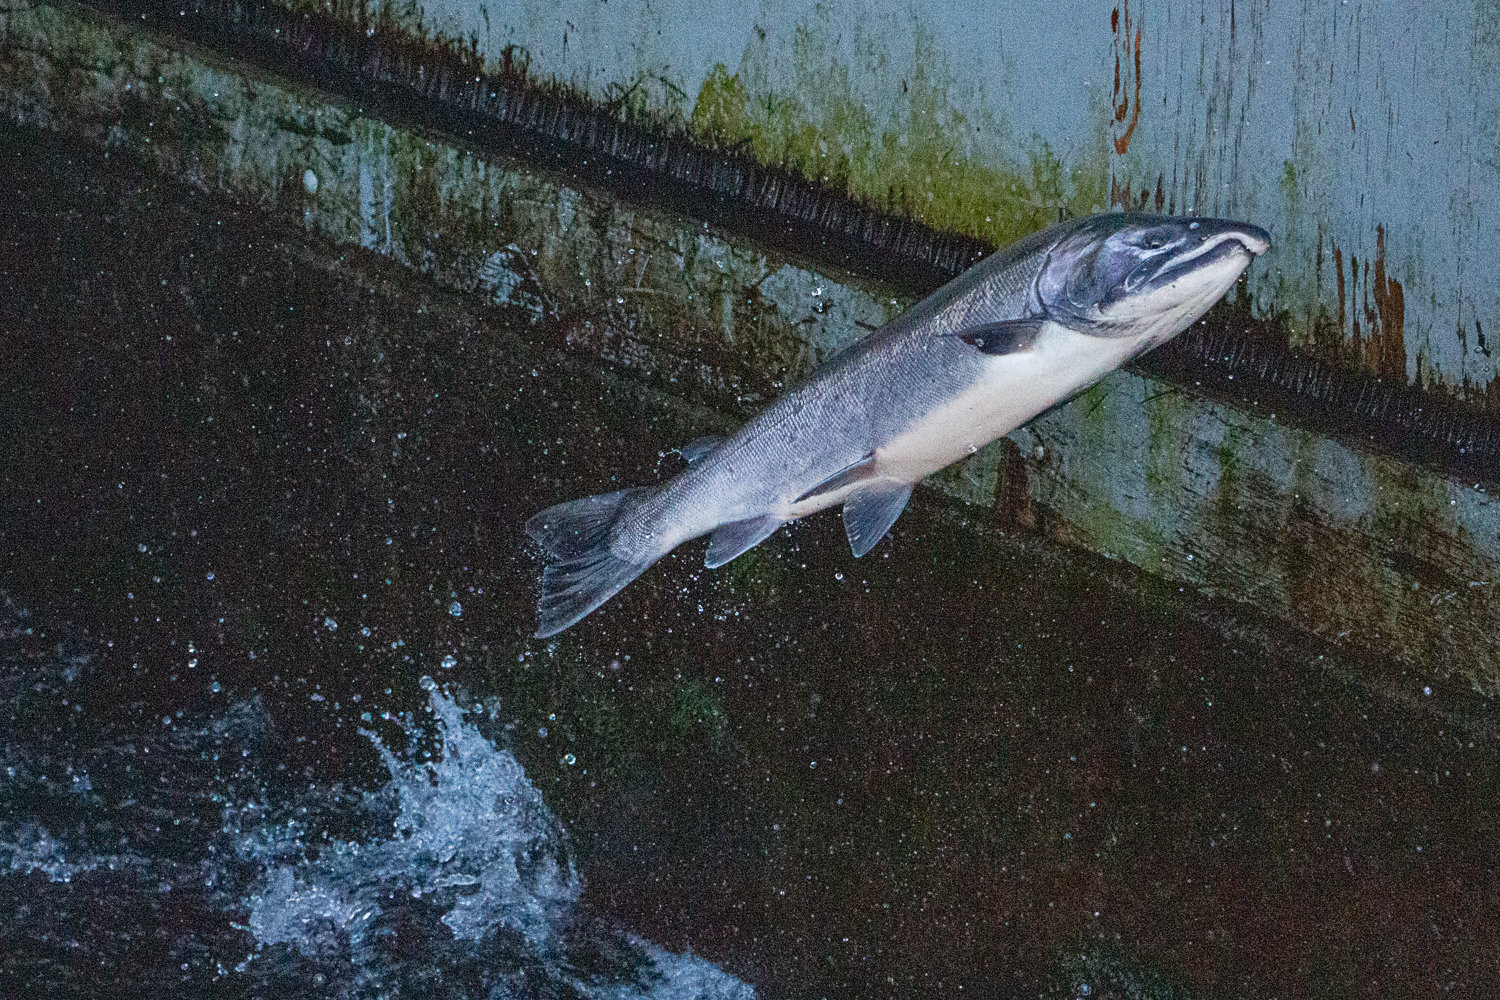 An adult coho salmon launches itself out of the water at the top of the fish bridge located at the Cowlitz Salmon Hatchery at the Barrier Dam.